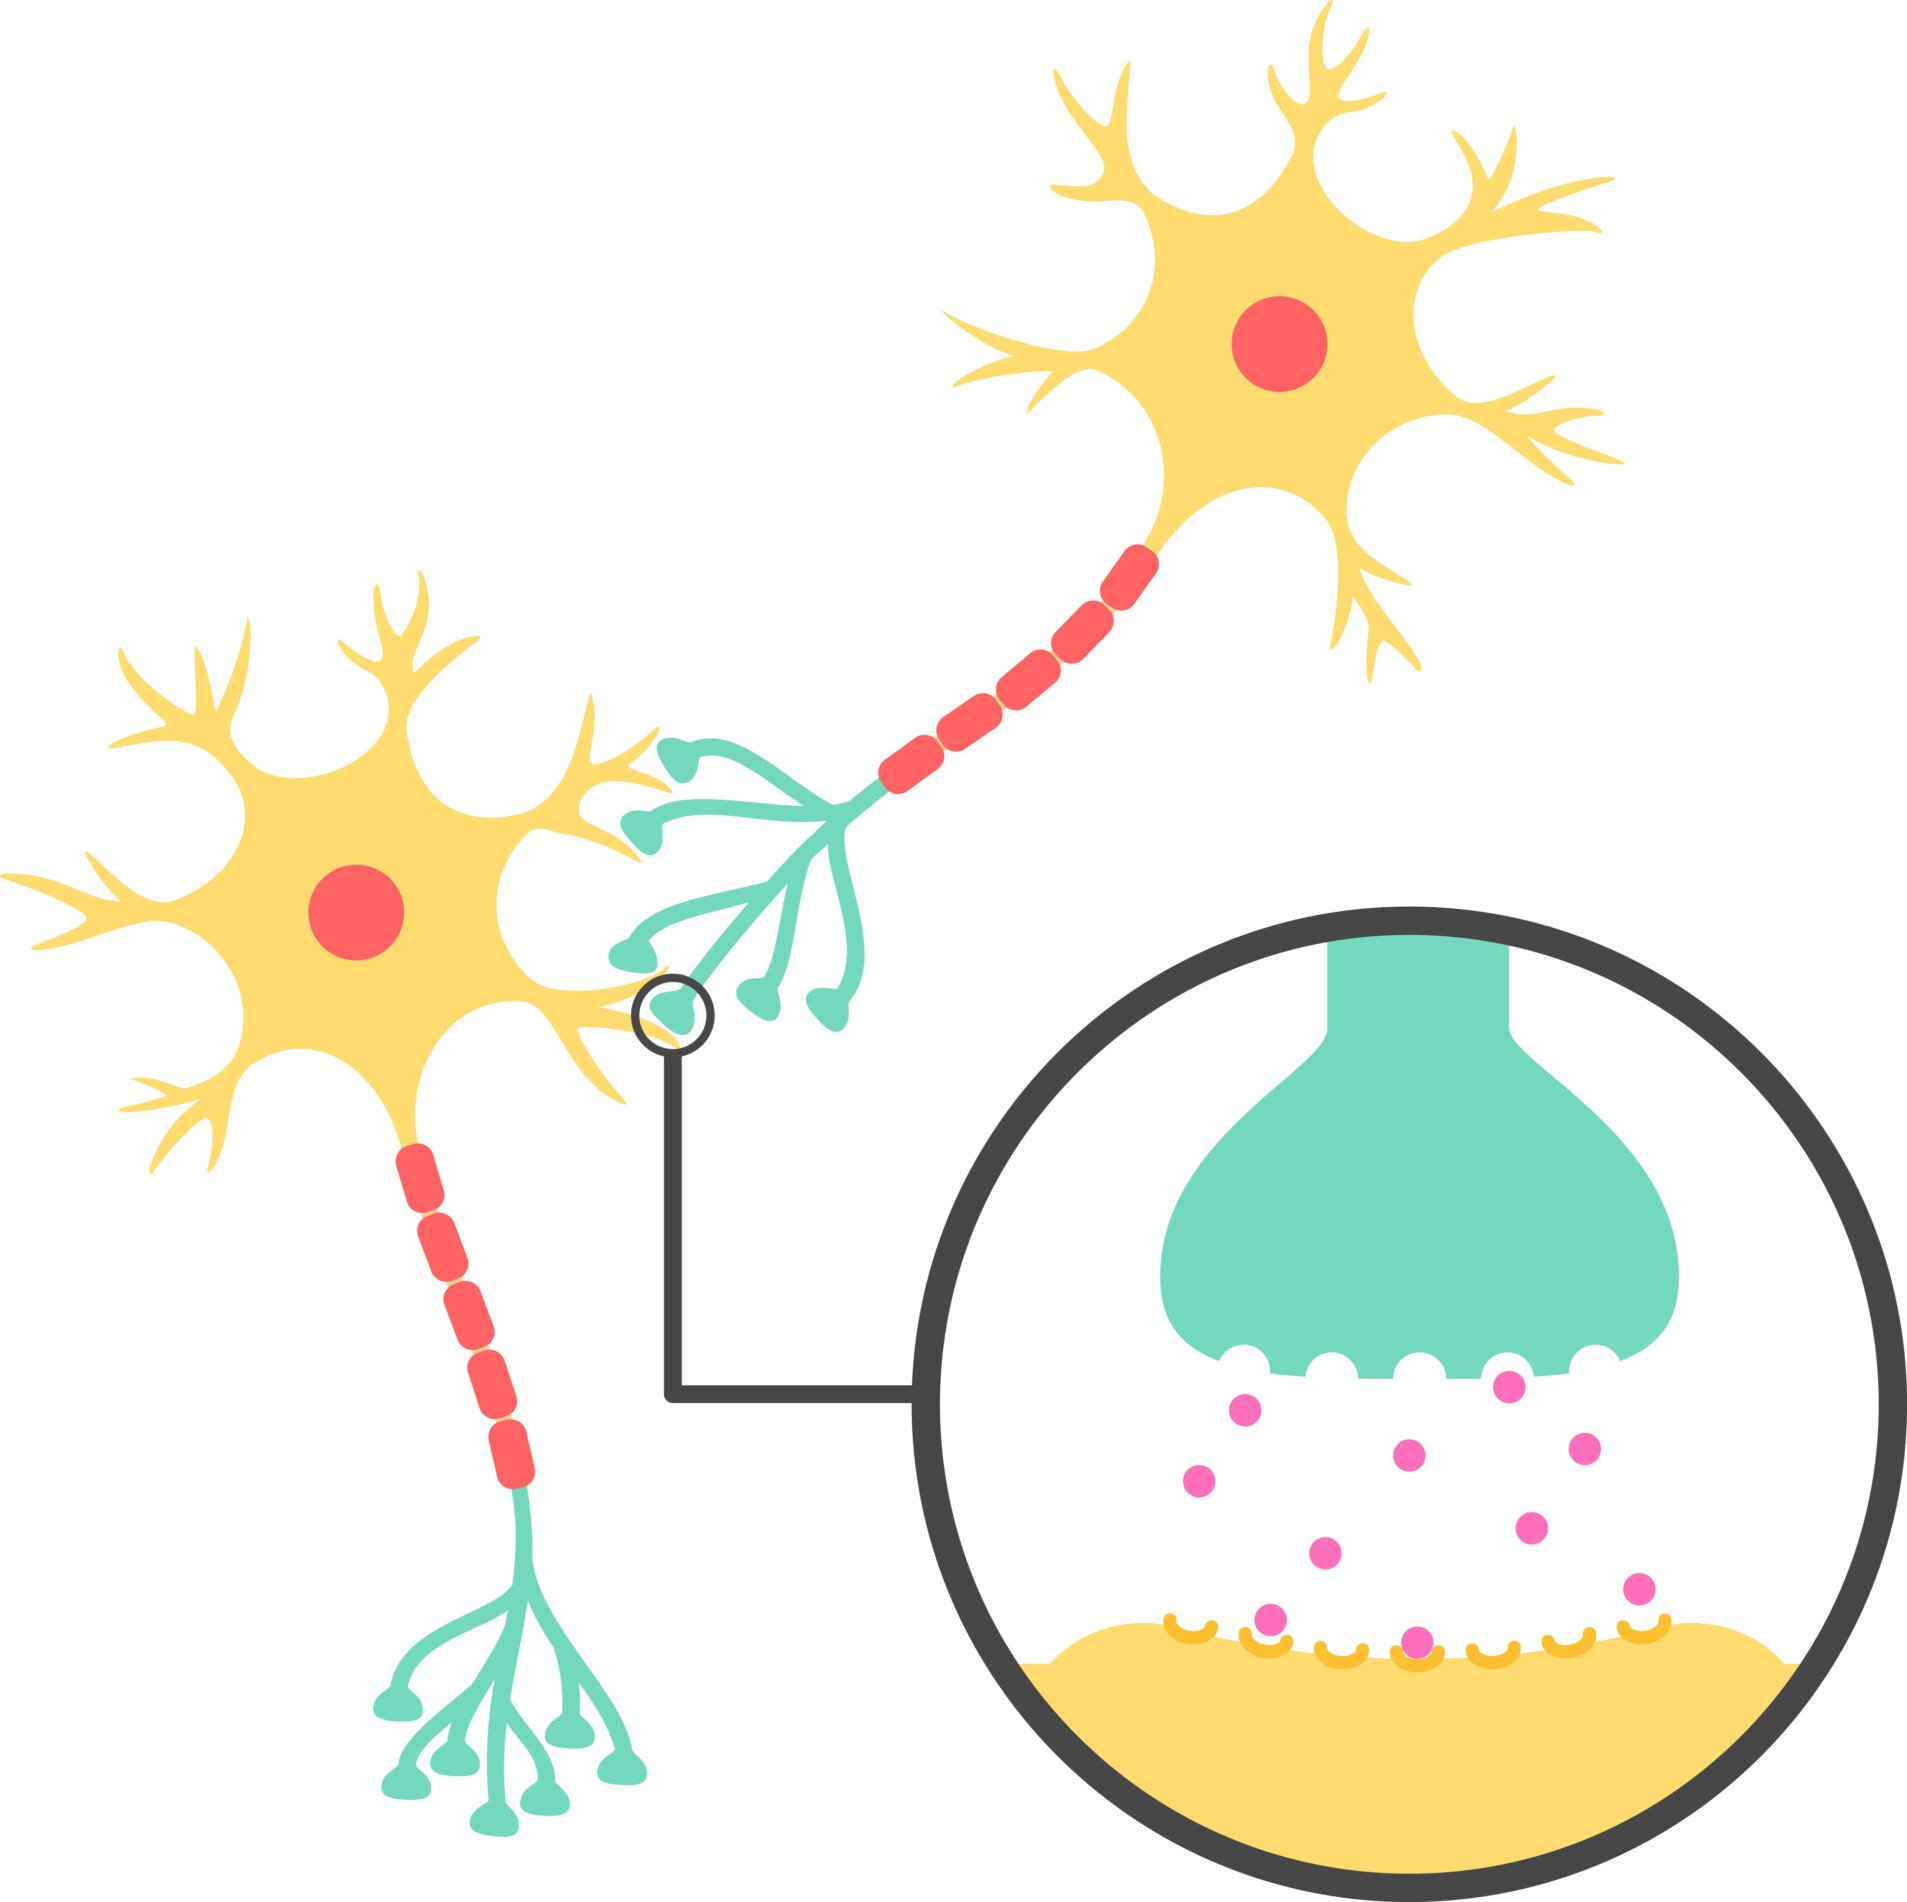 a diagram of two neurons with a close up included of a synapse